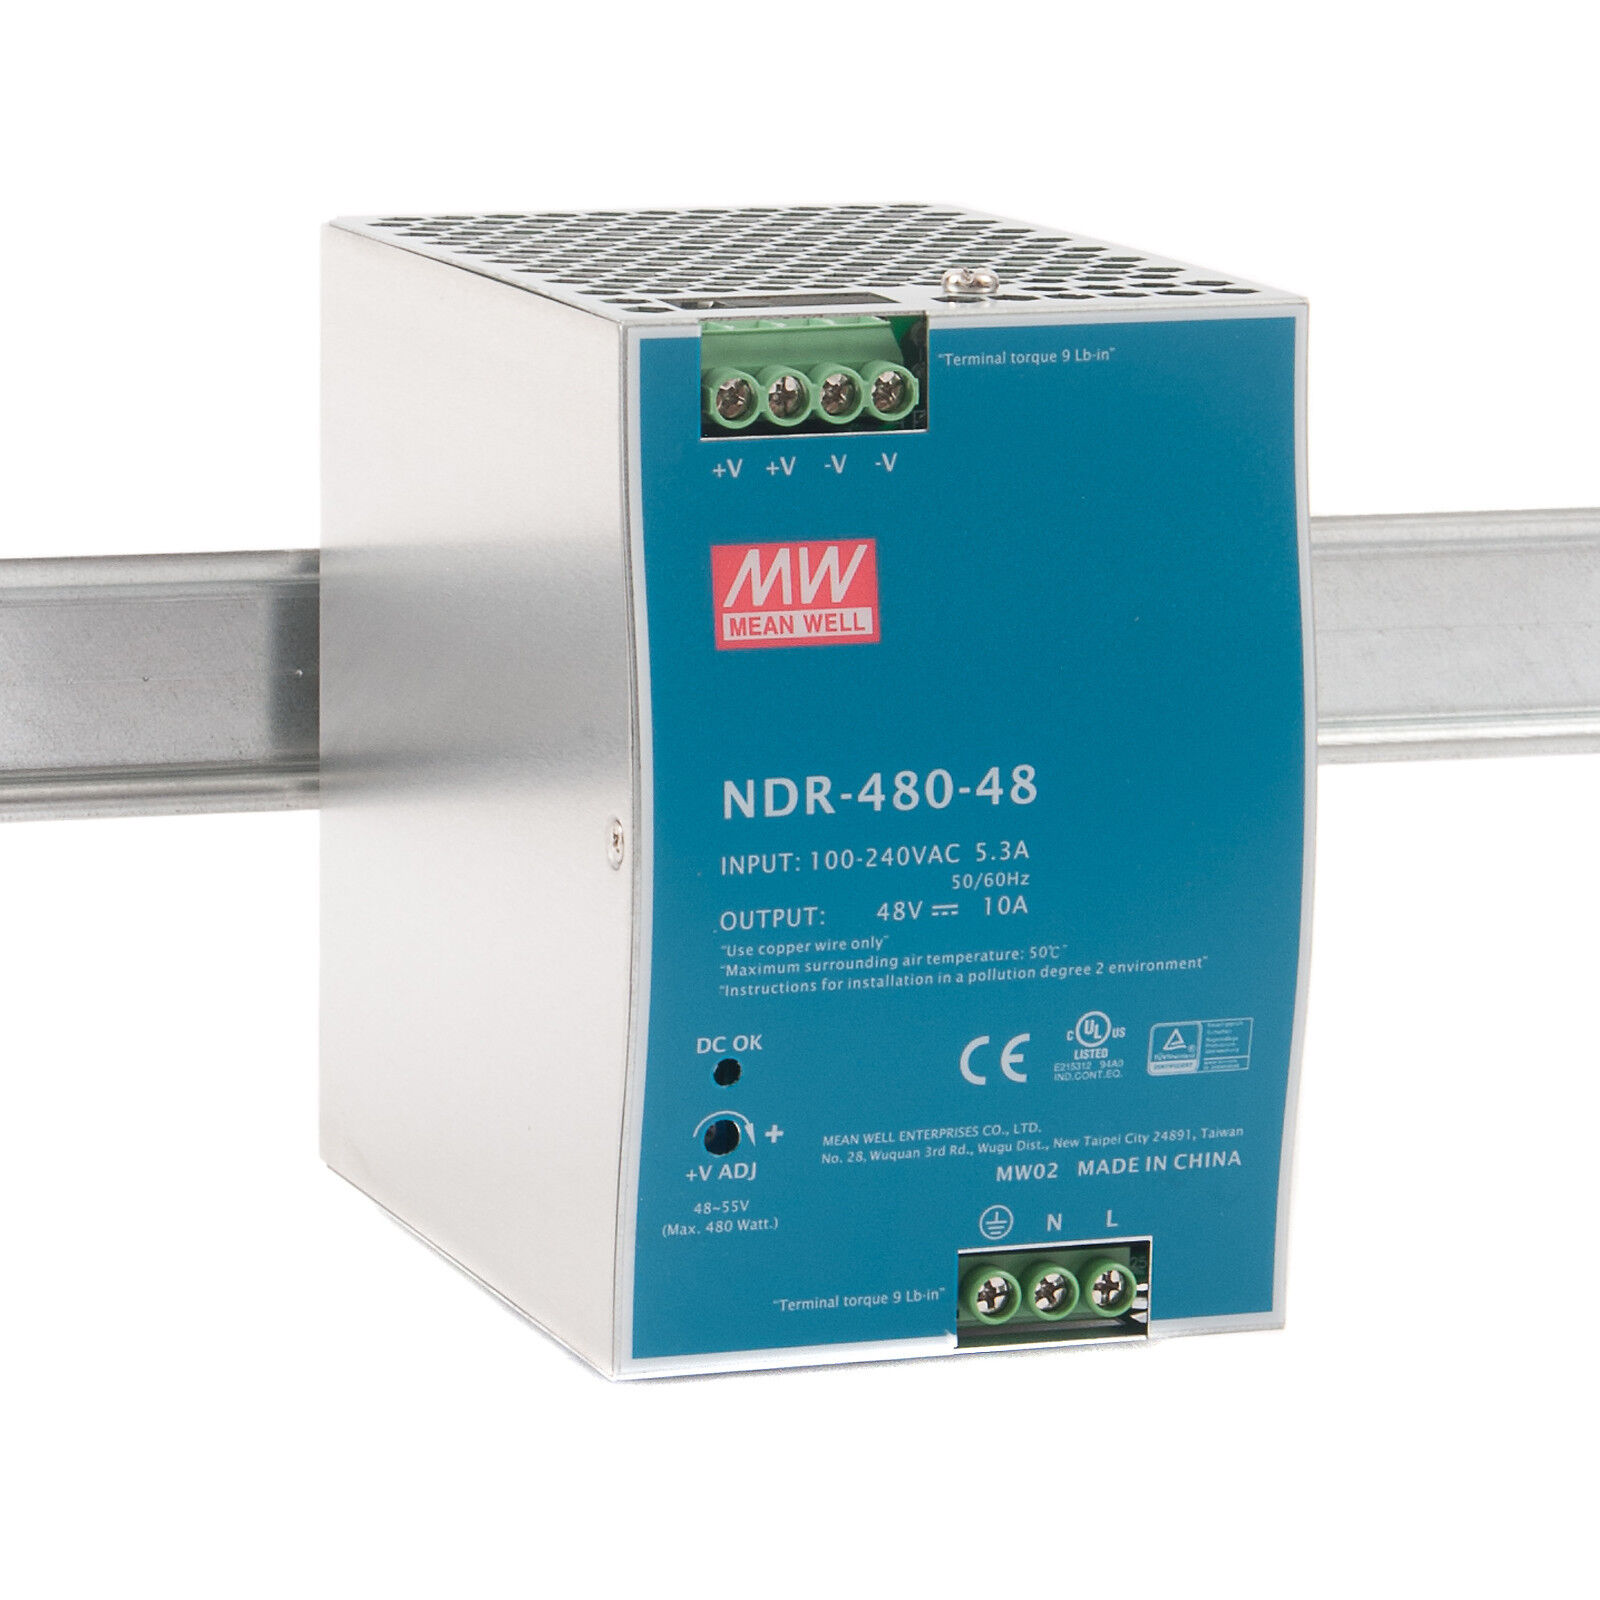 MEANWELL 48VDC 90-264VAC/ 127-370VDC POWER SUPPLY 10A TERMINAL CONNECTOR 2.4A 2x OUTPUT TERM STRIP OUTPUT DIN RAIL MOUNTED BLUE/SILVER